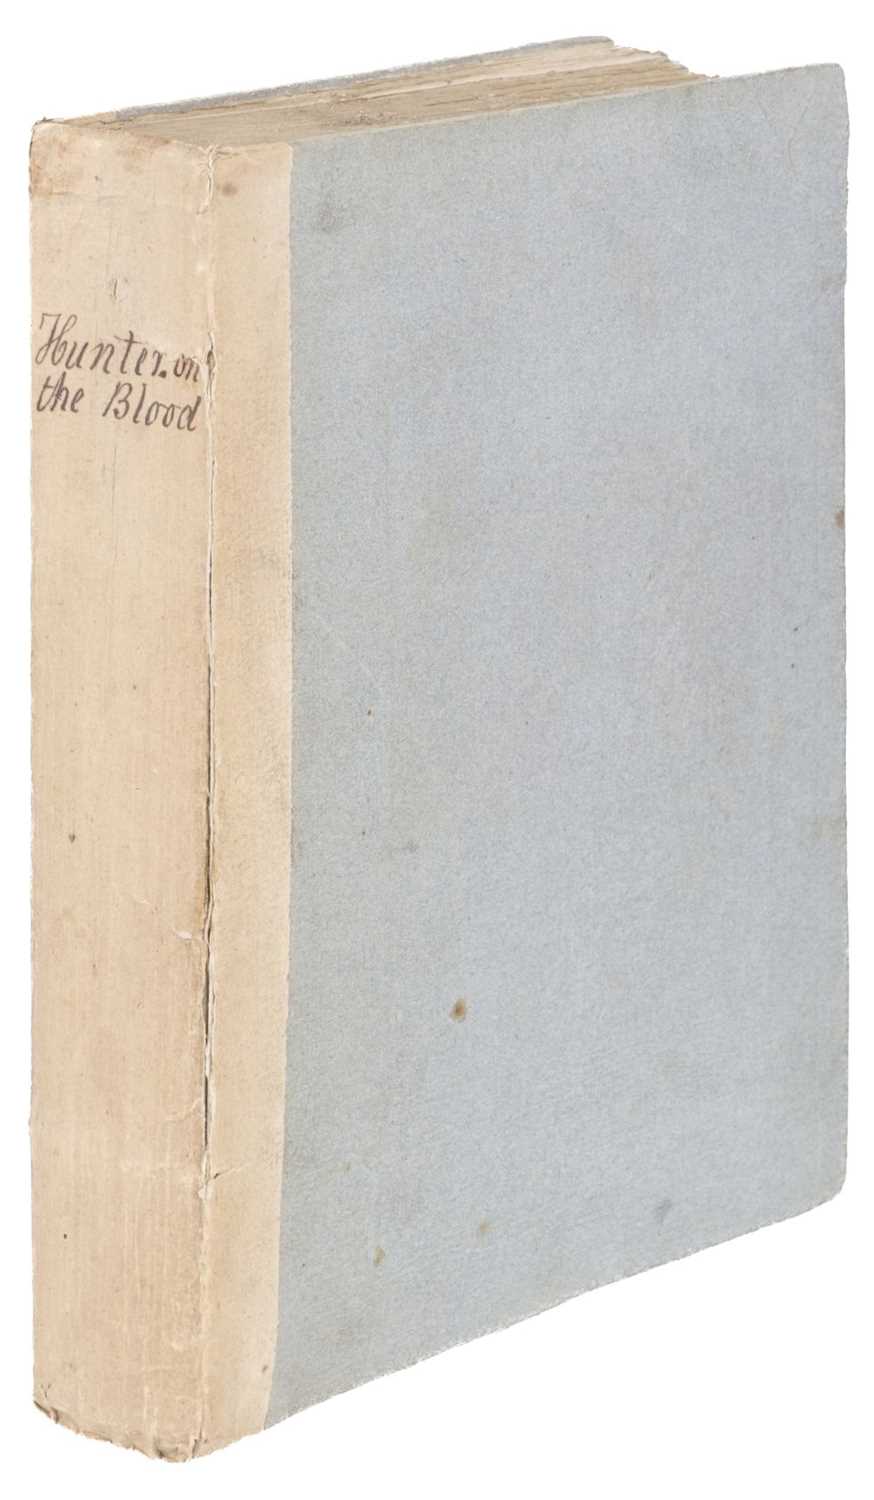 Lot 302 - Hunter (John). A Treatise on the Blood, Inflammation, and Gun-Shot Wounds, 1st edition, 1794